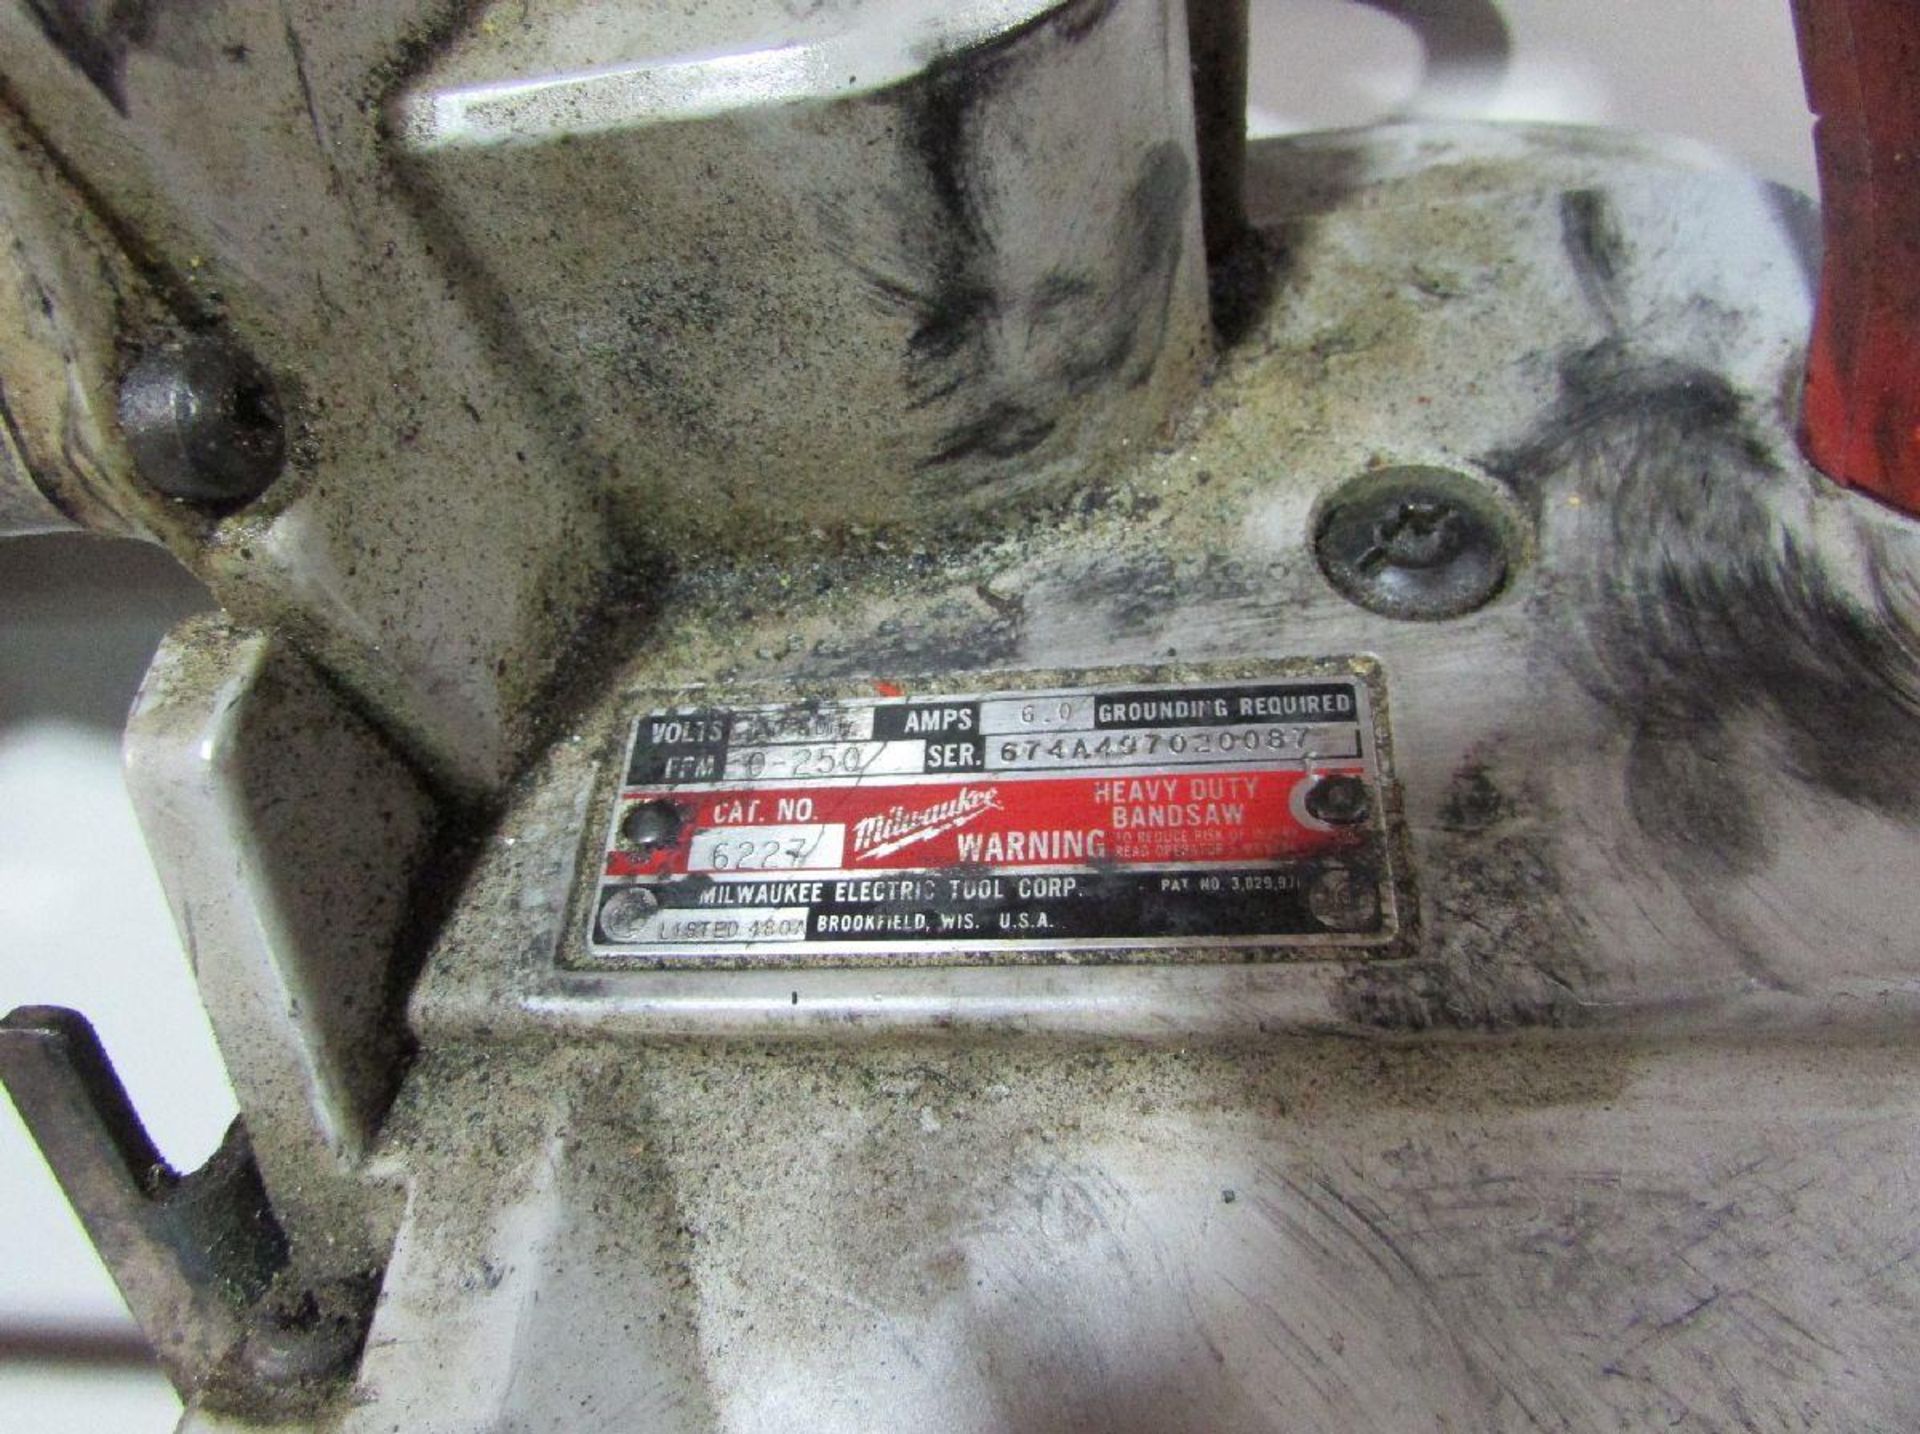 Milwaukee Cat # 6227 Heavy Duty VS Electric Portable Band Saw - Image 2 of 3